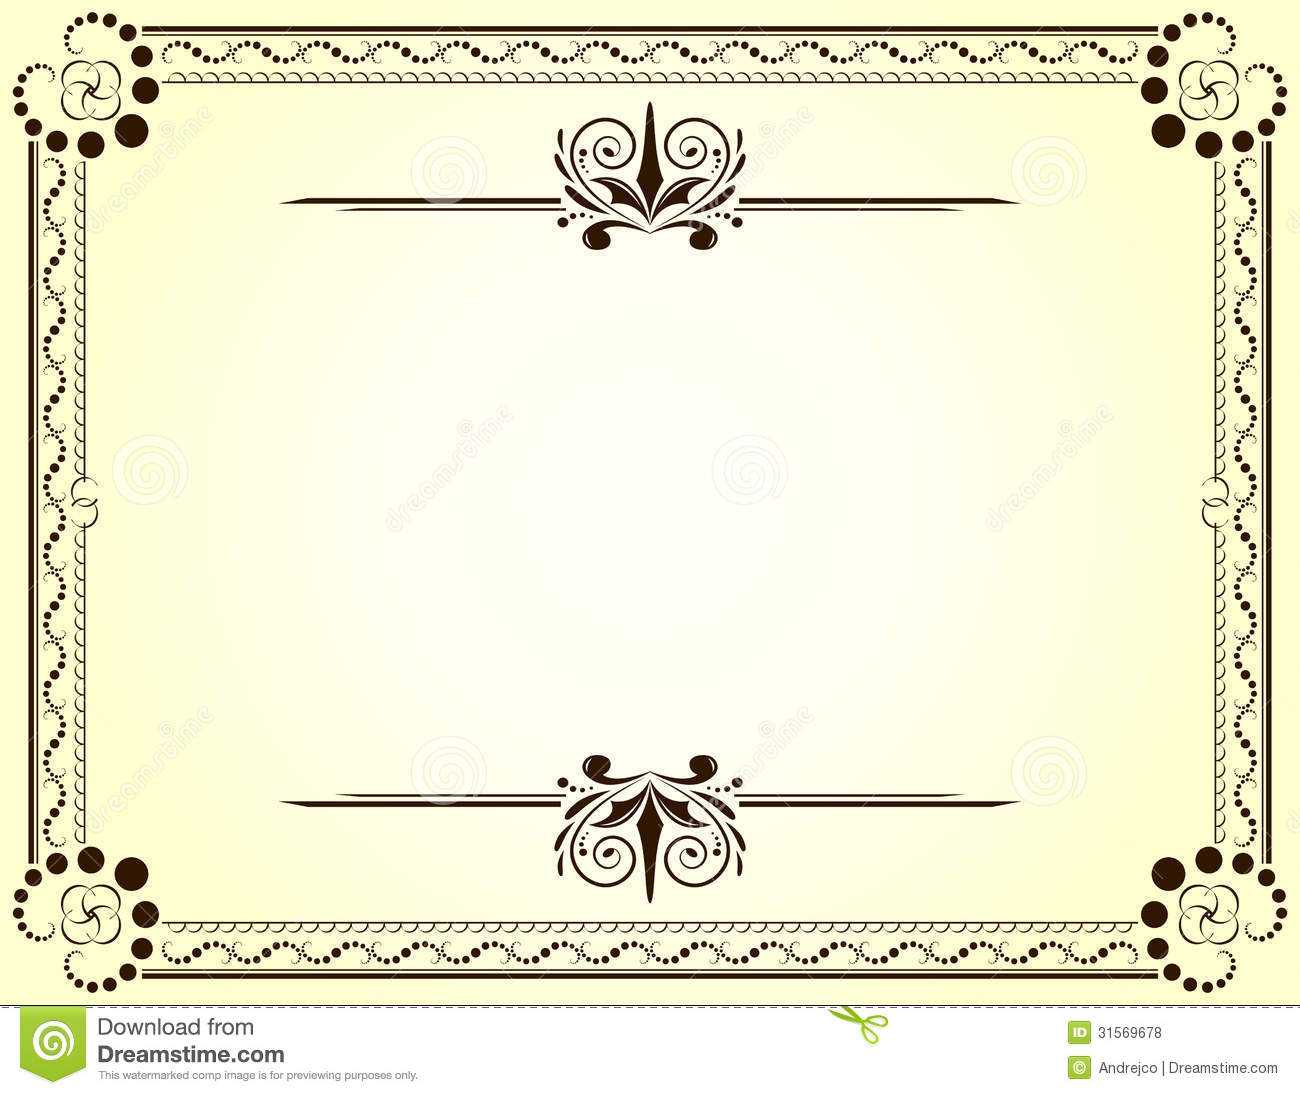 Certificate Stock Vector. Illustration Of Vignette, Frame With Blank Certificate Templates Free Download